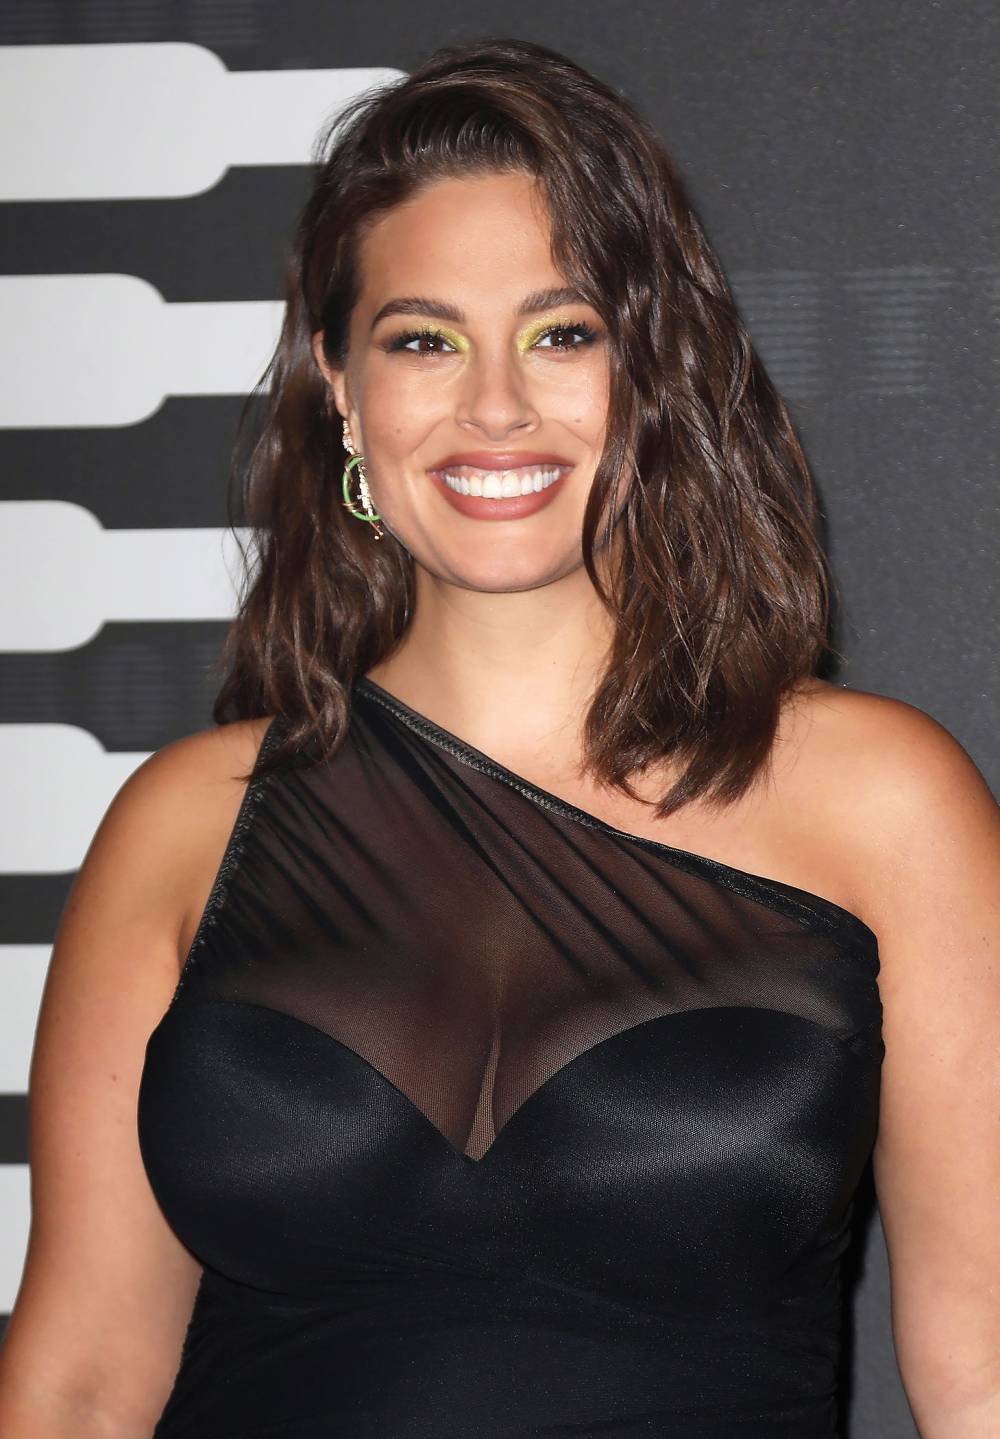 Ashley Graham’s Shares Nude Photo: ‘It’s Hot Out There and So Are You’